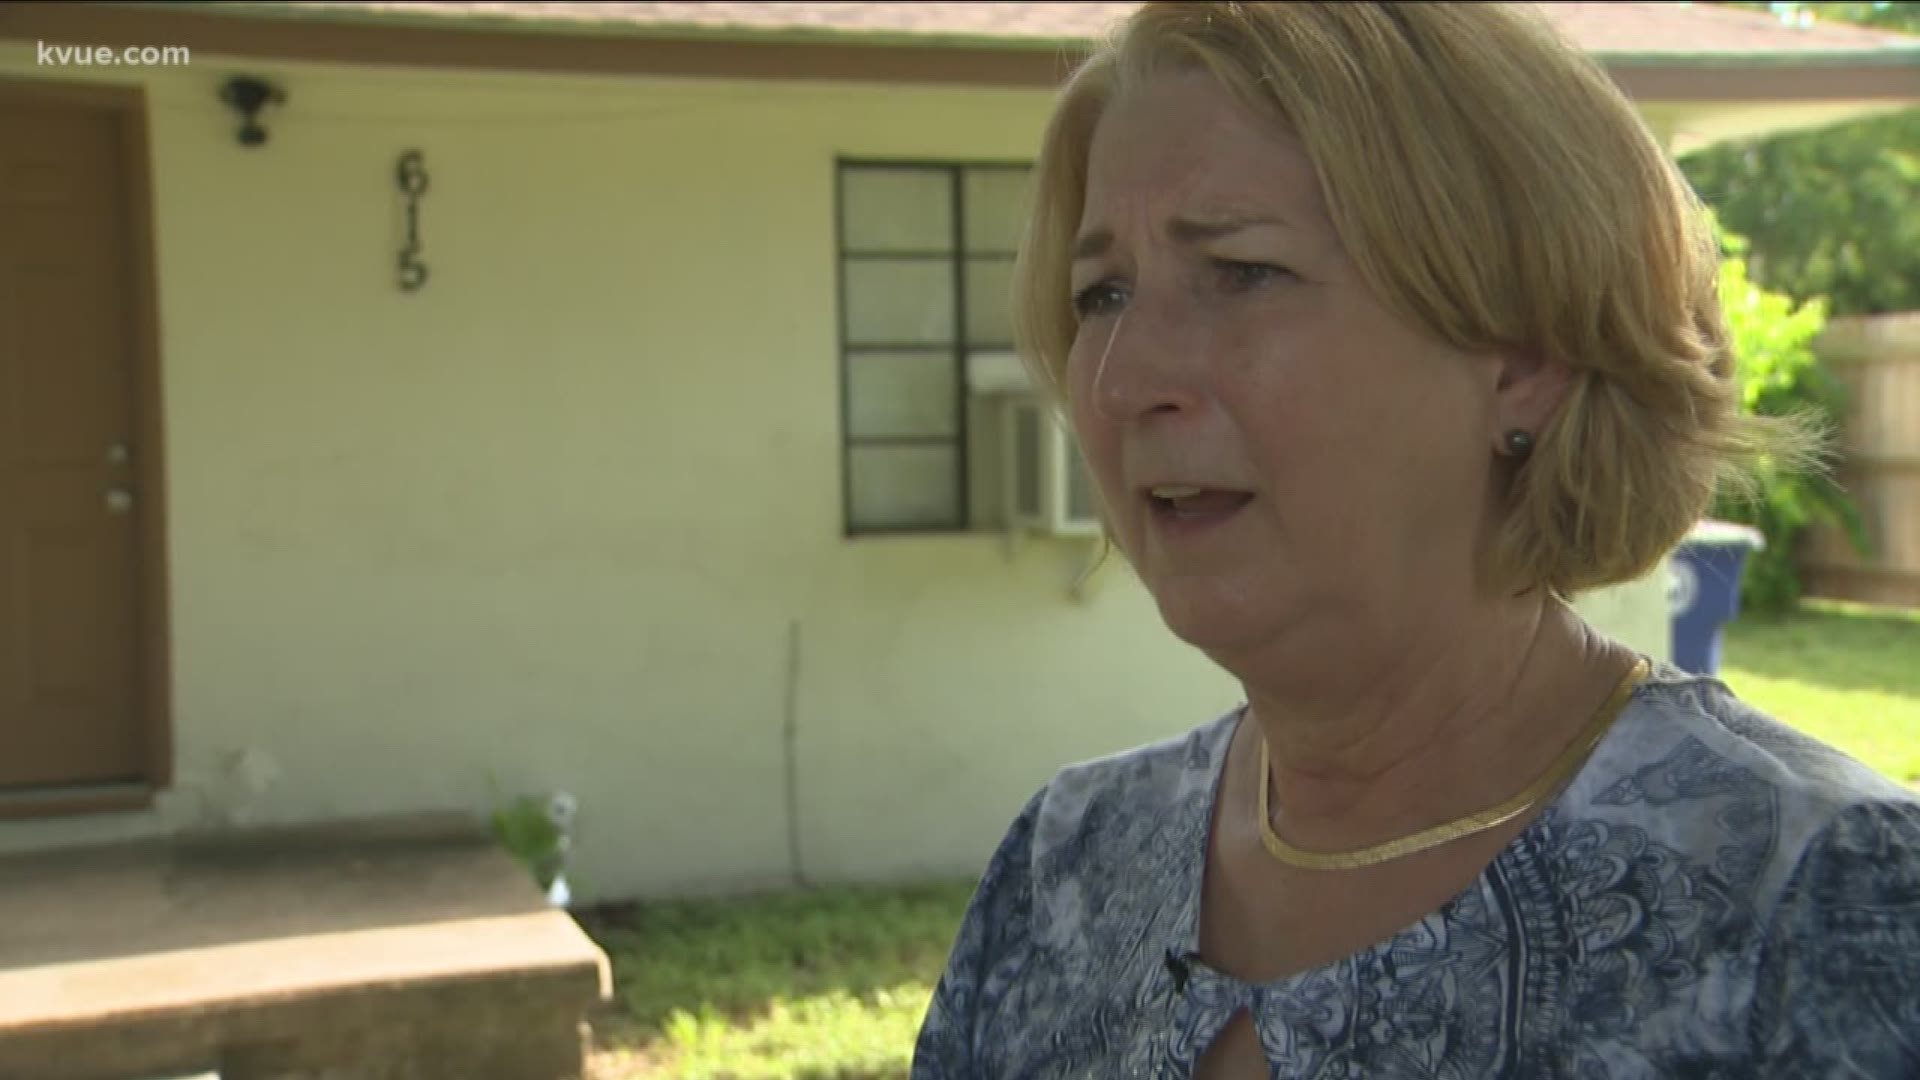 Ruth Howard says she feels violated – she says she ran into two homeless people in the backyard of a home she's trying to sell.